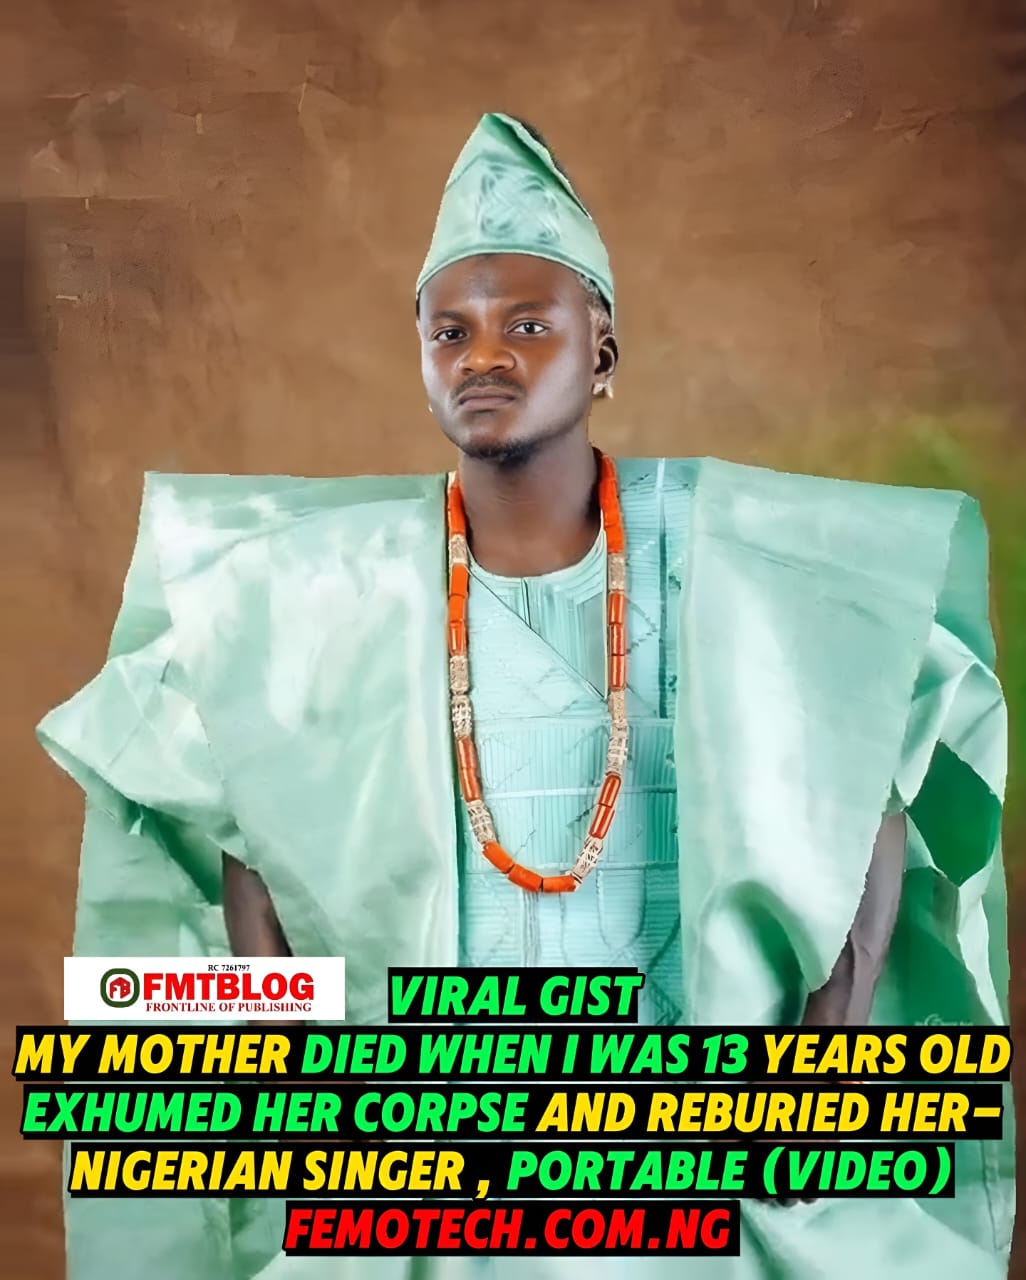 My Mother Died When I Was 13 Years Old. Exhumed Her Corpse And Reburied Her -Nigerian Singer, Portable (VIDEO)